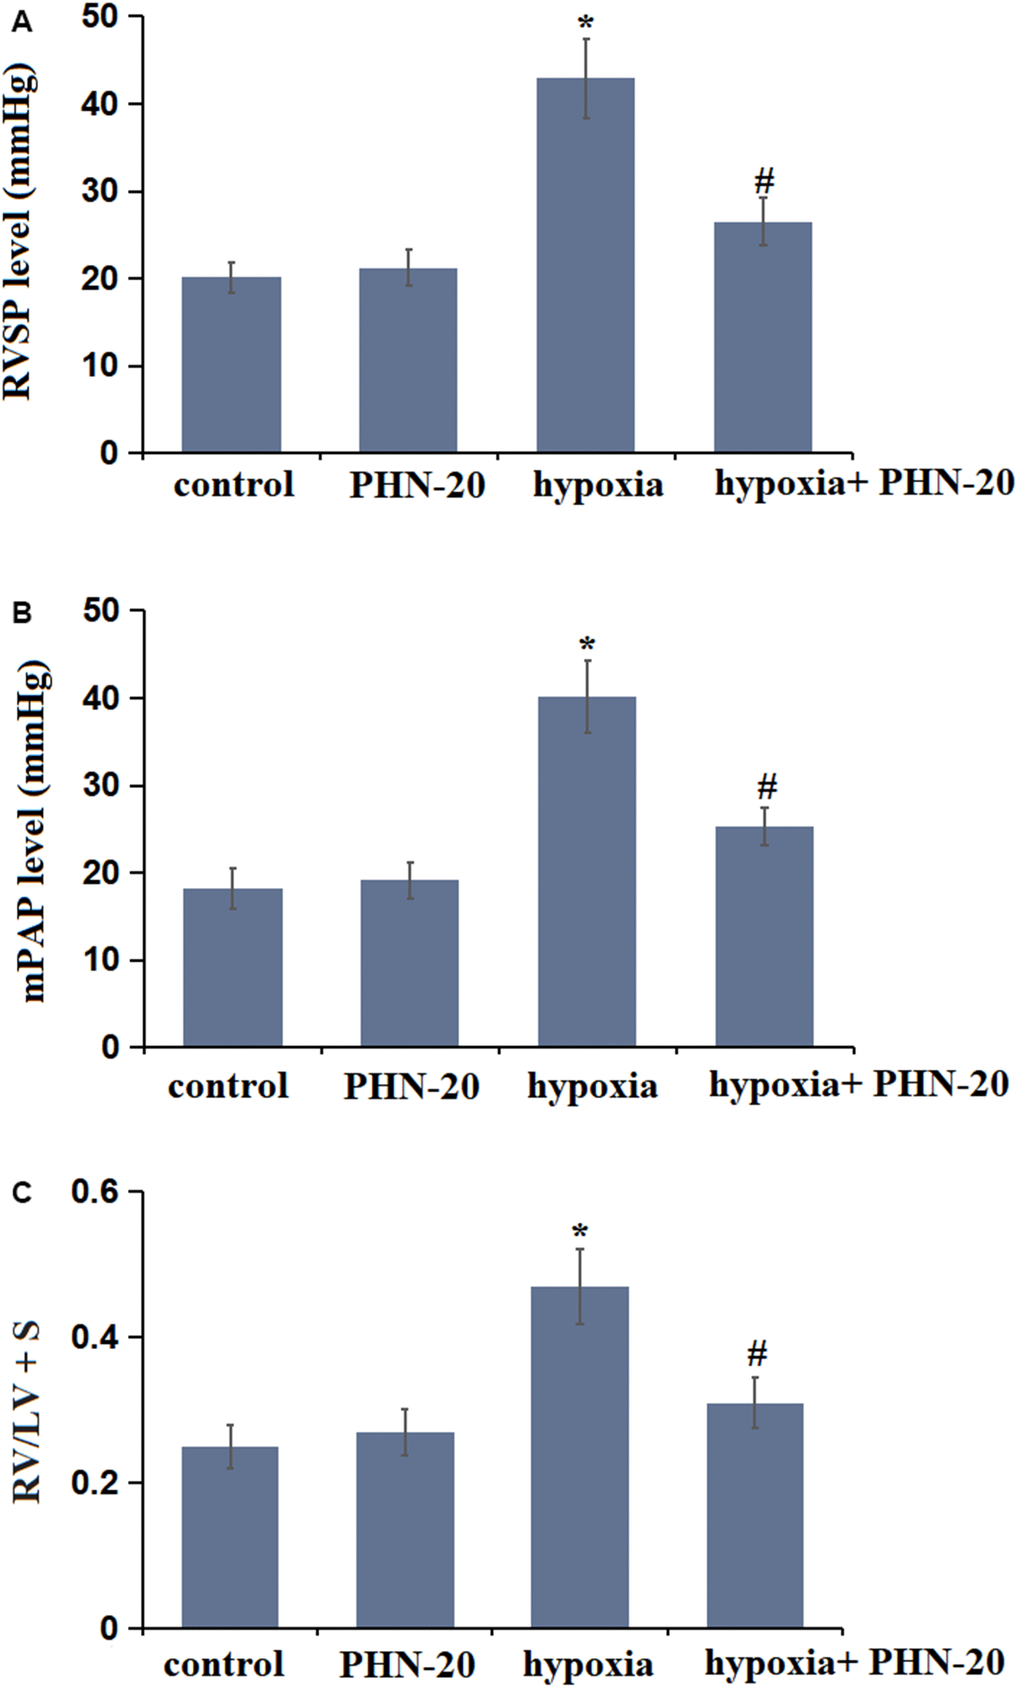 Treatment with Phoenixin-20 (PHN-20) attenuated hypoxia-induced hemodynamics in rats. (A) Right ventricular systolic pressure (RVSP) (mmHg), (B) mean pulmonary arterial pressure (mPAP) (mmHg), and (C) right ventricle-to-left ventricle+septum (RV/LV + S) were measured (*, P